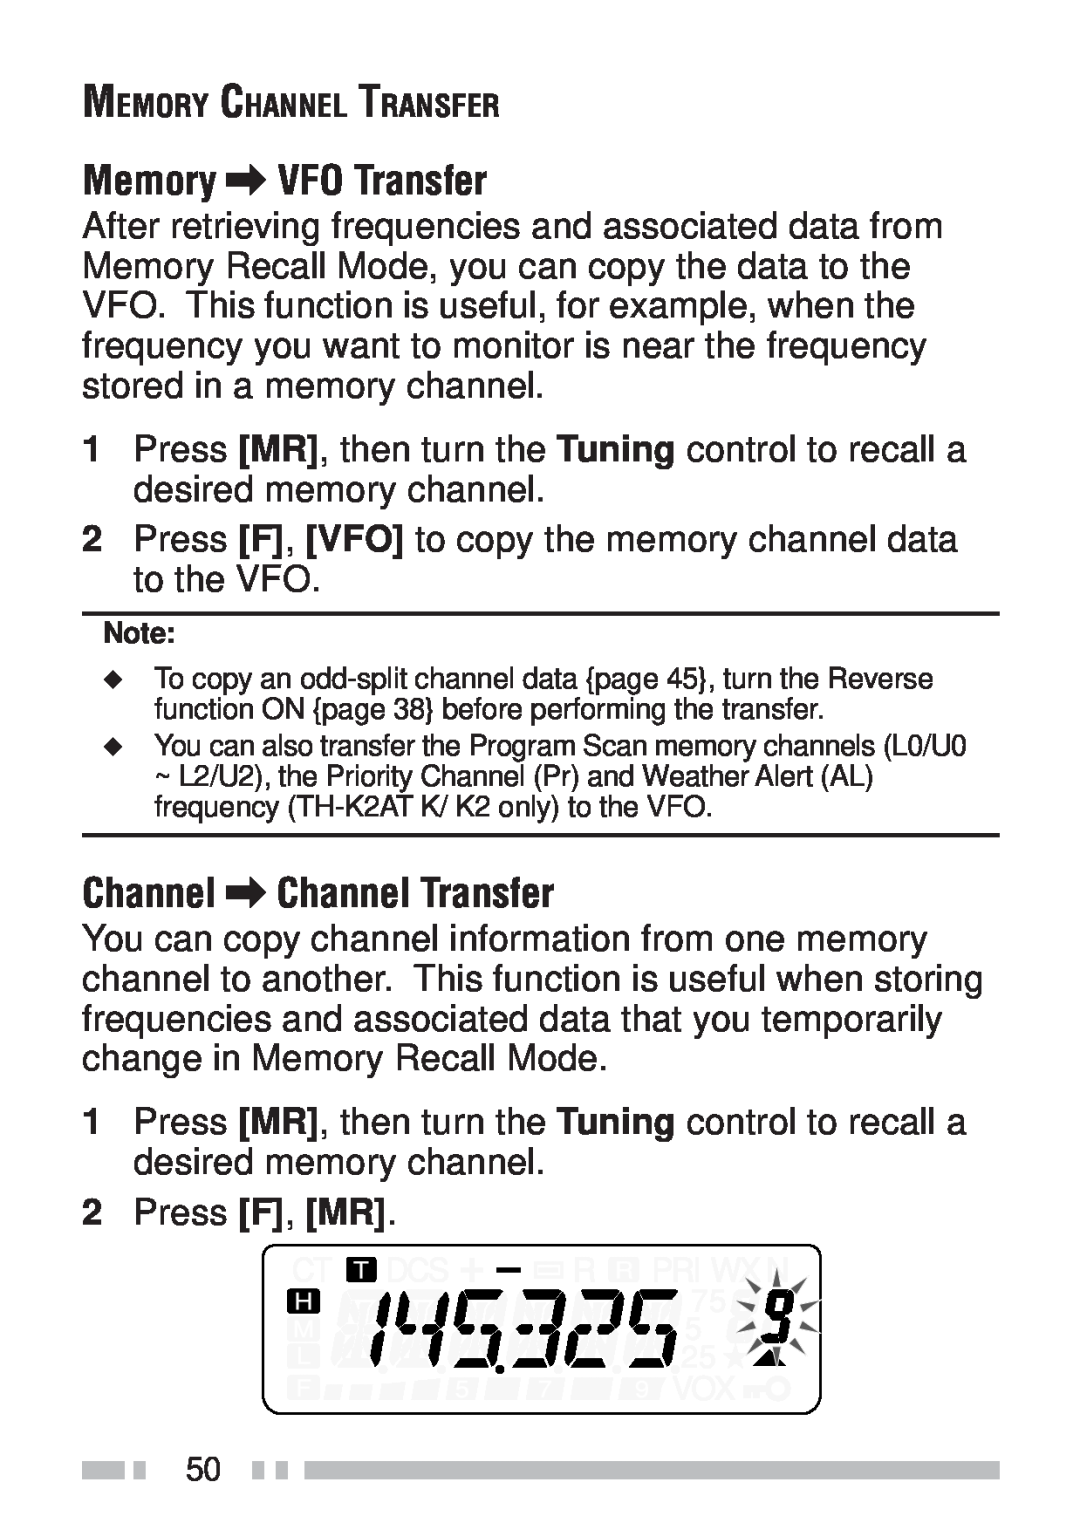 Kenwood TH-KAE, TH-K4AT, TH-K2ET, TH-K2AT instruction manual Memory \ VFO Transfer, Channel \ Channel Transfer 